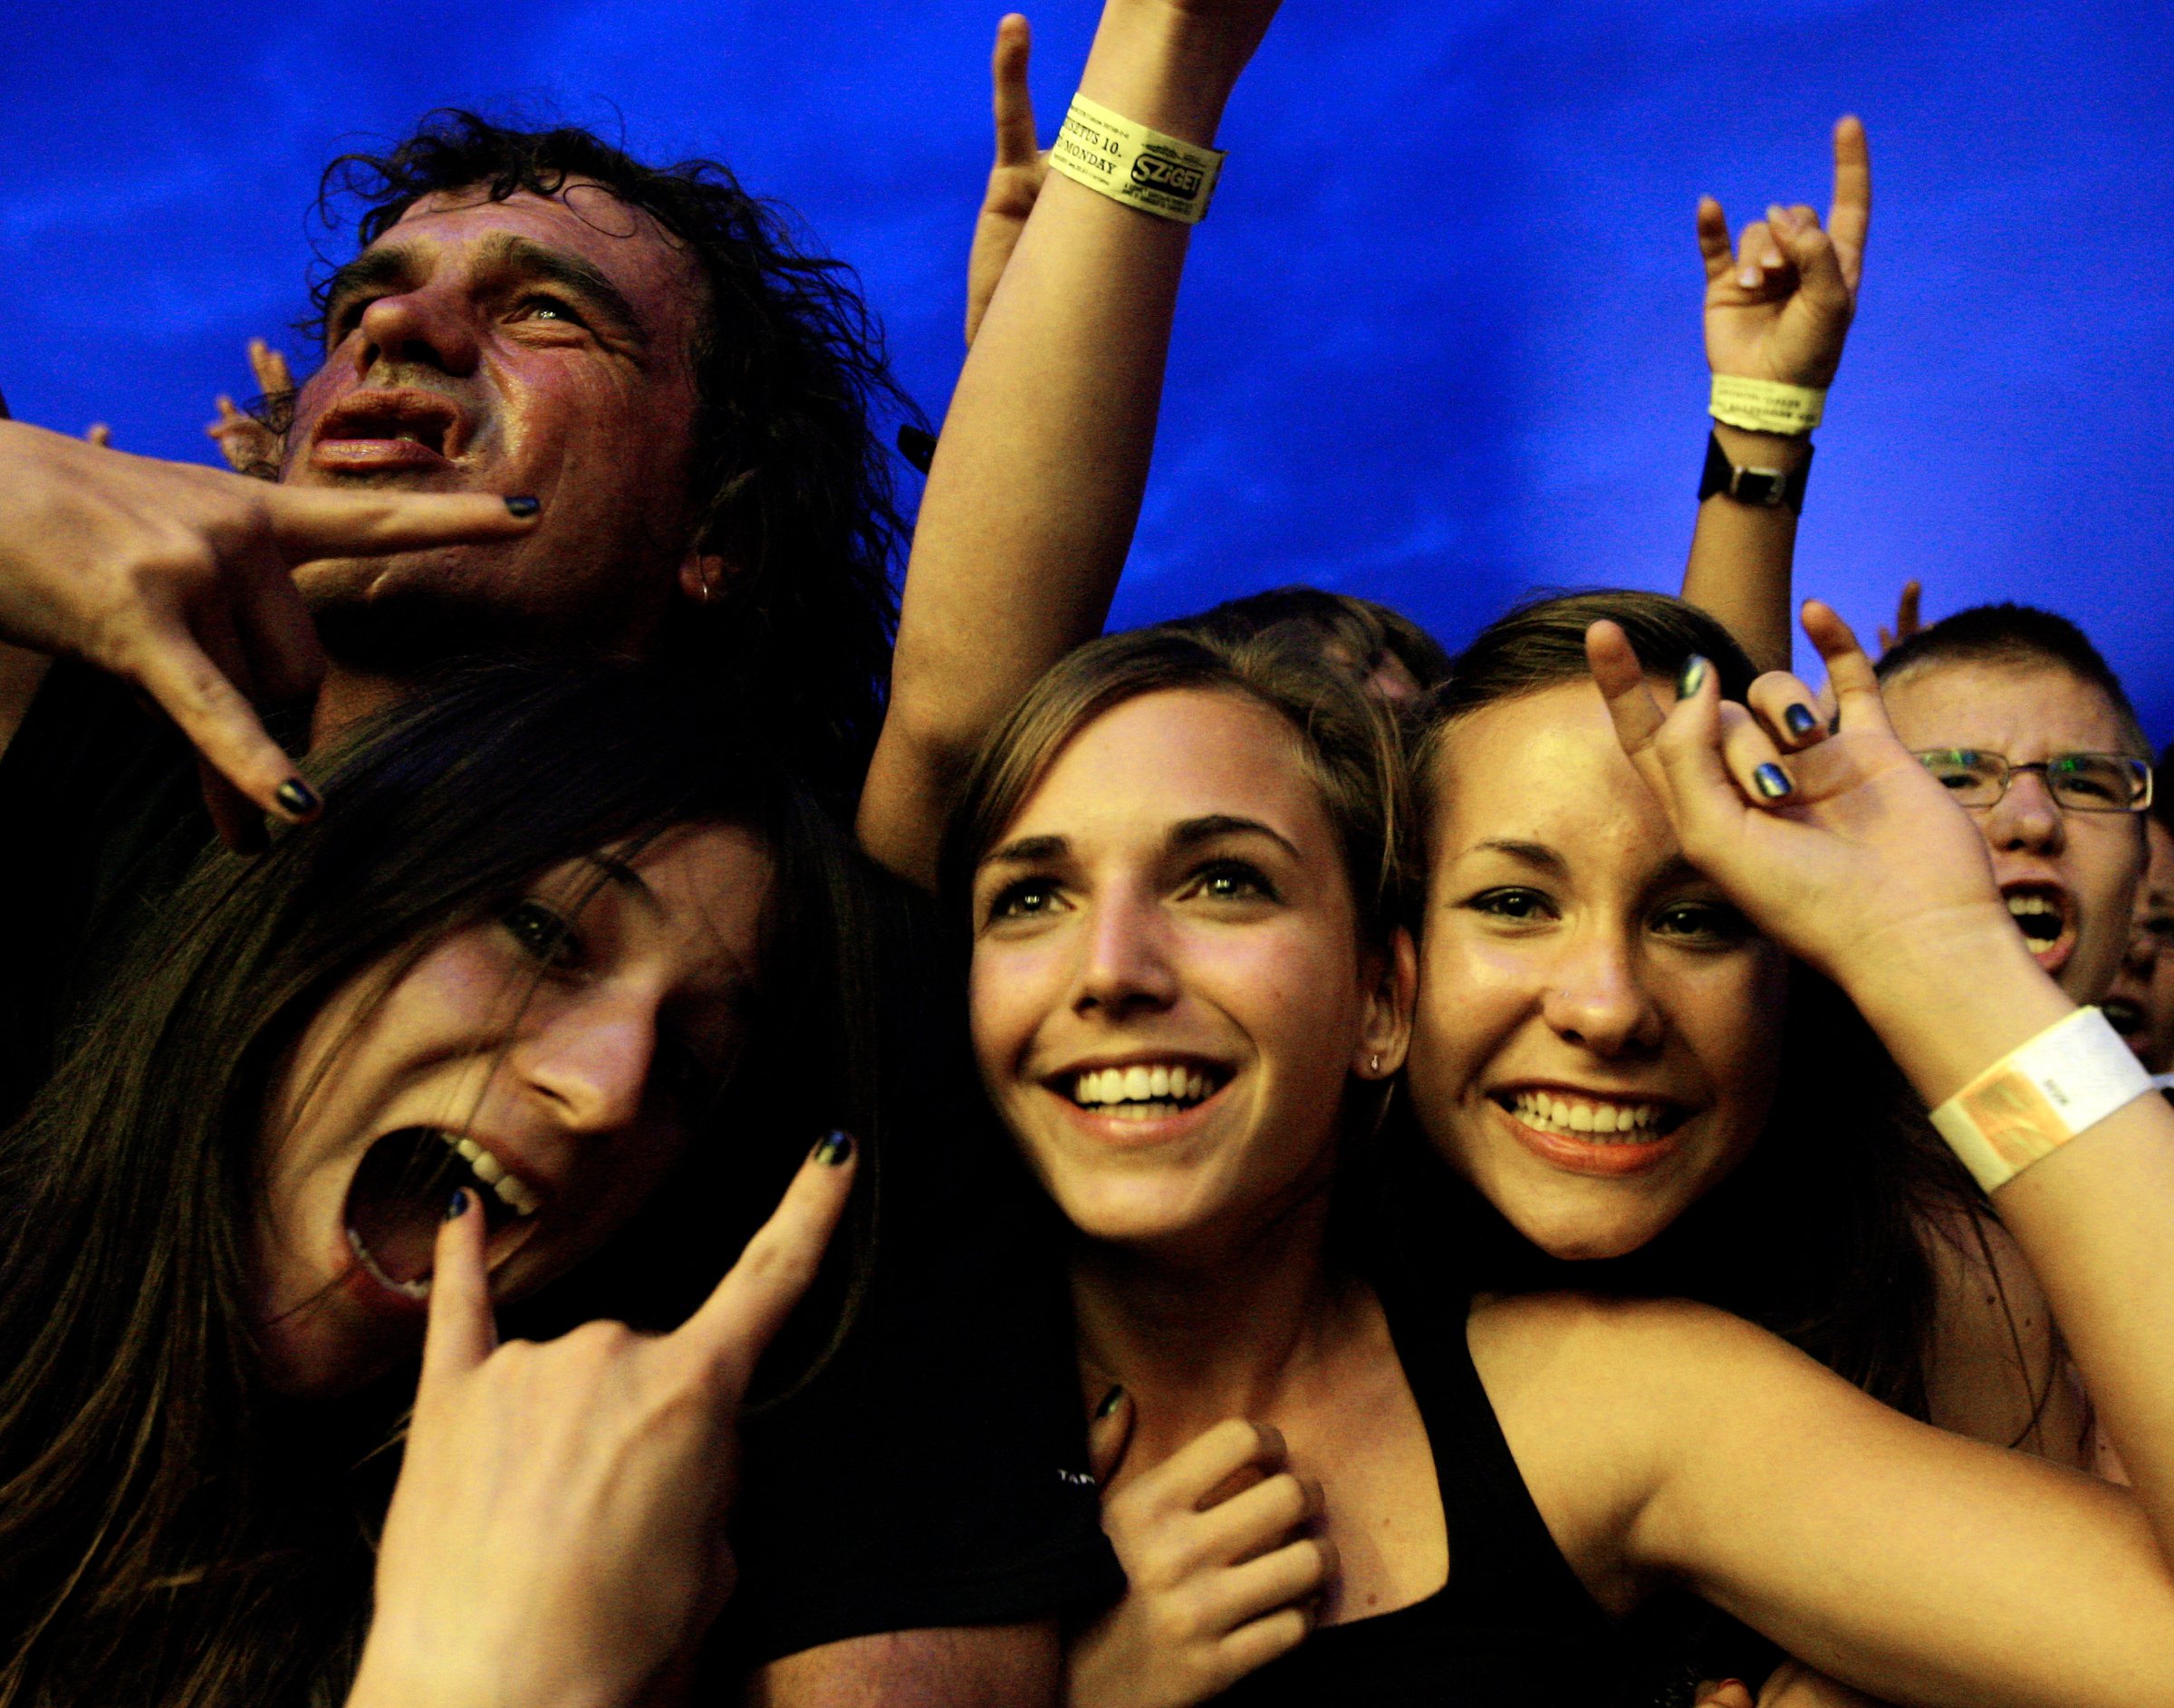 Revellers attend a concert by Hungarian metal band "Tankcsapda" during Budapest's one-week, round-the-clock Sziget ('Island') music festival